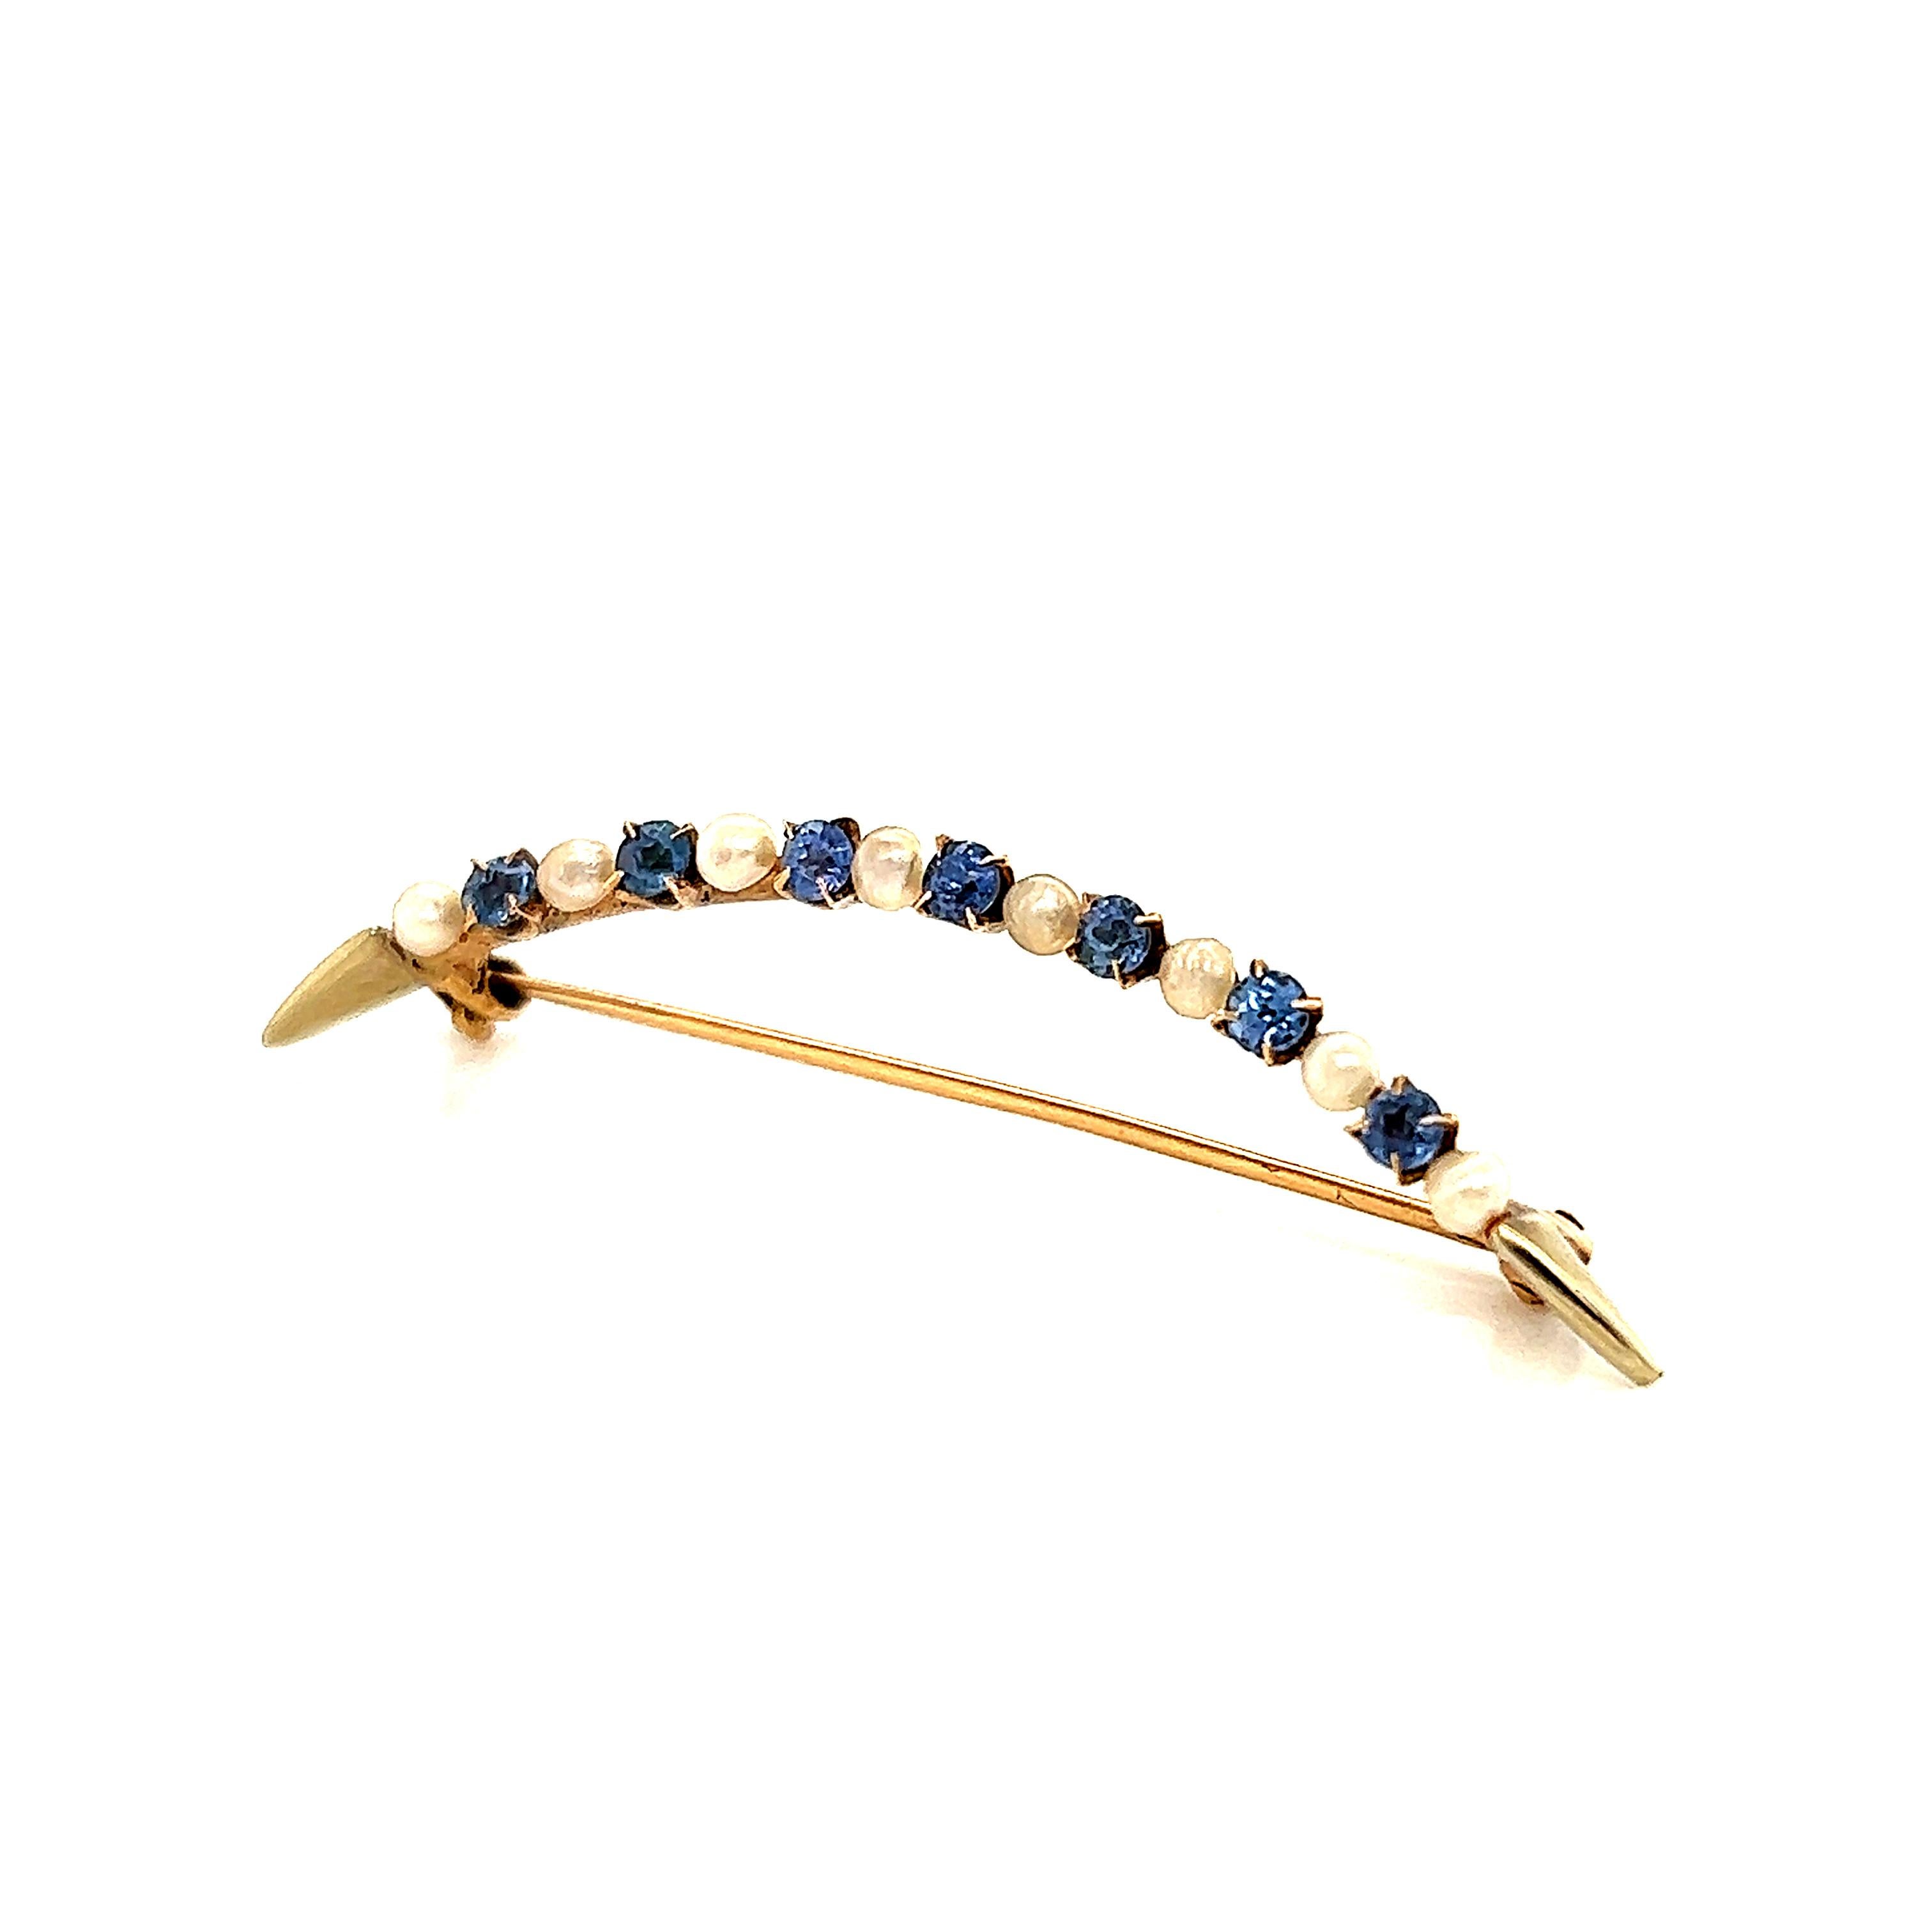 Gorgeous Victorian brooch crafted in 14k yellow gold. The brooch is crafted in the crescent moon shape set with natural seed pearls and sapphires. The crescent moon celebrates the feminine moon goddess and therefore is associated with female